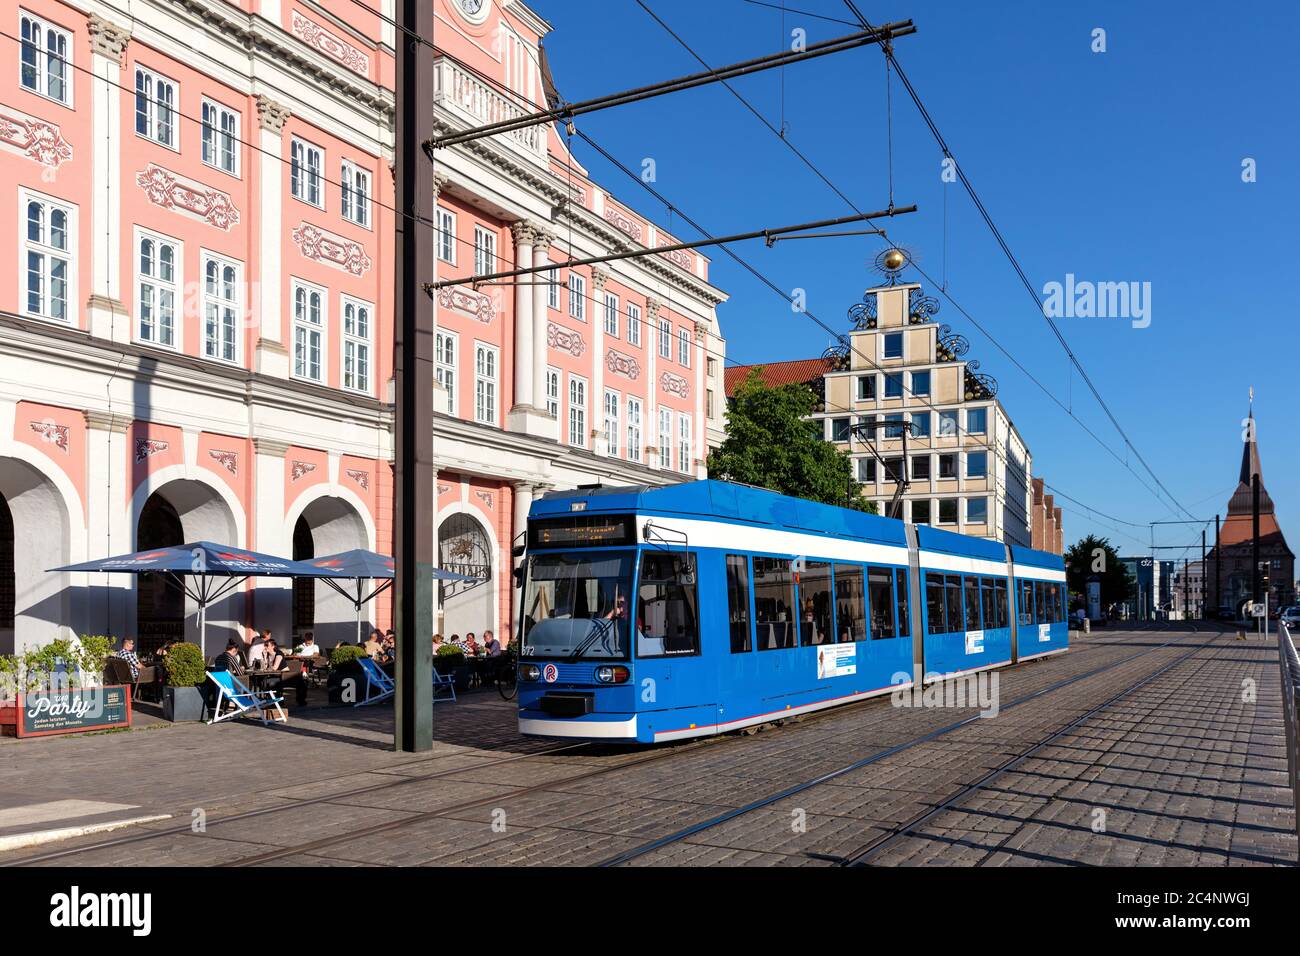 tram at City Hall in Rostock, Germany Stock Photo